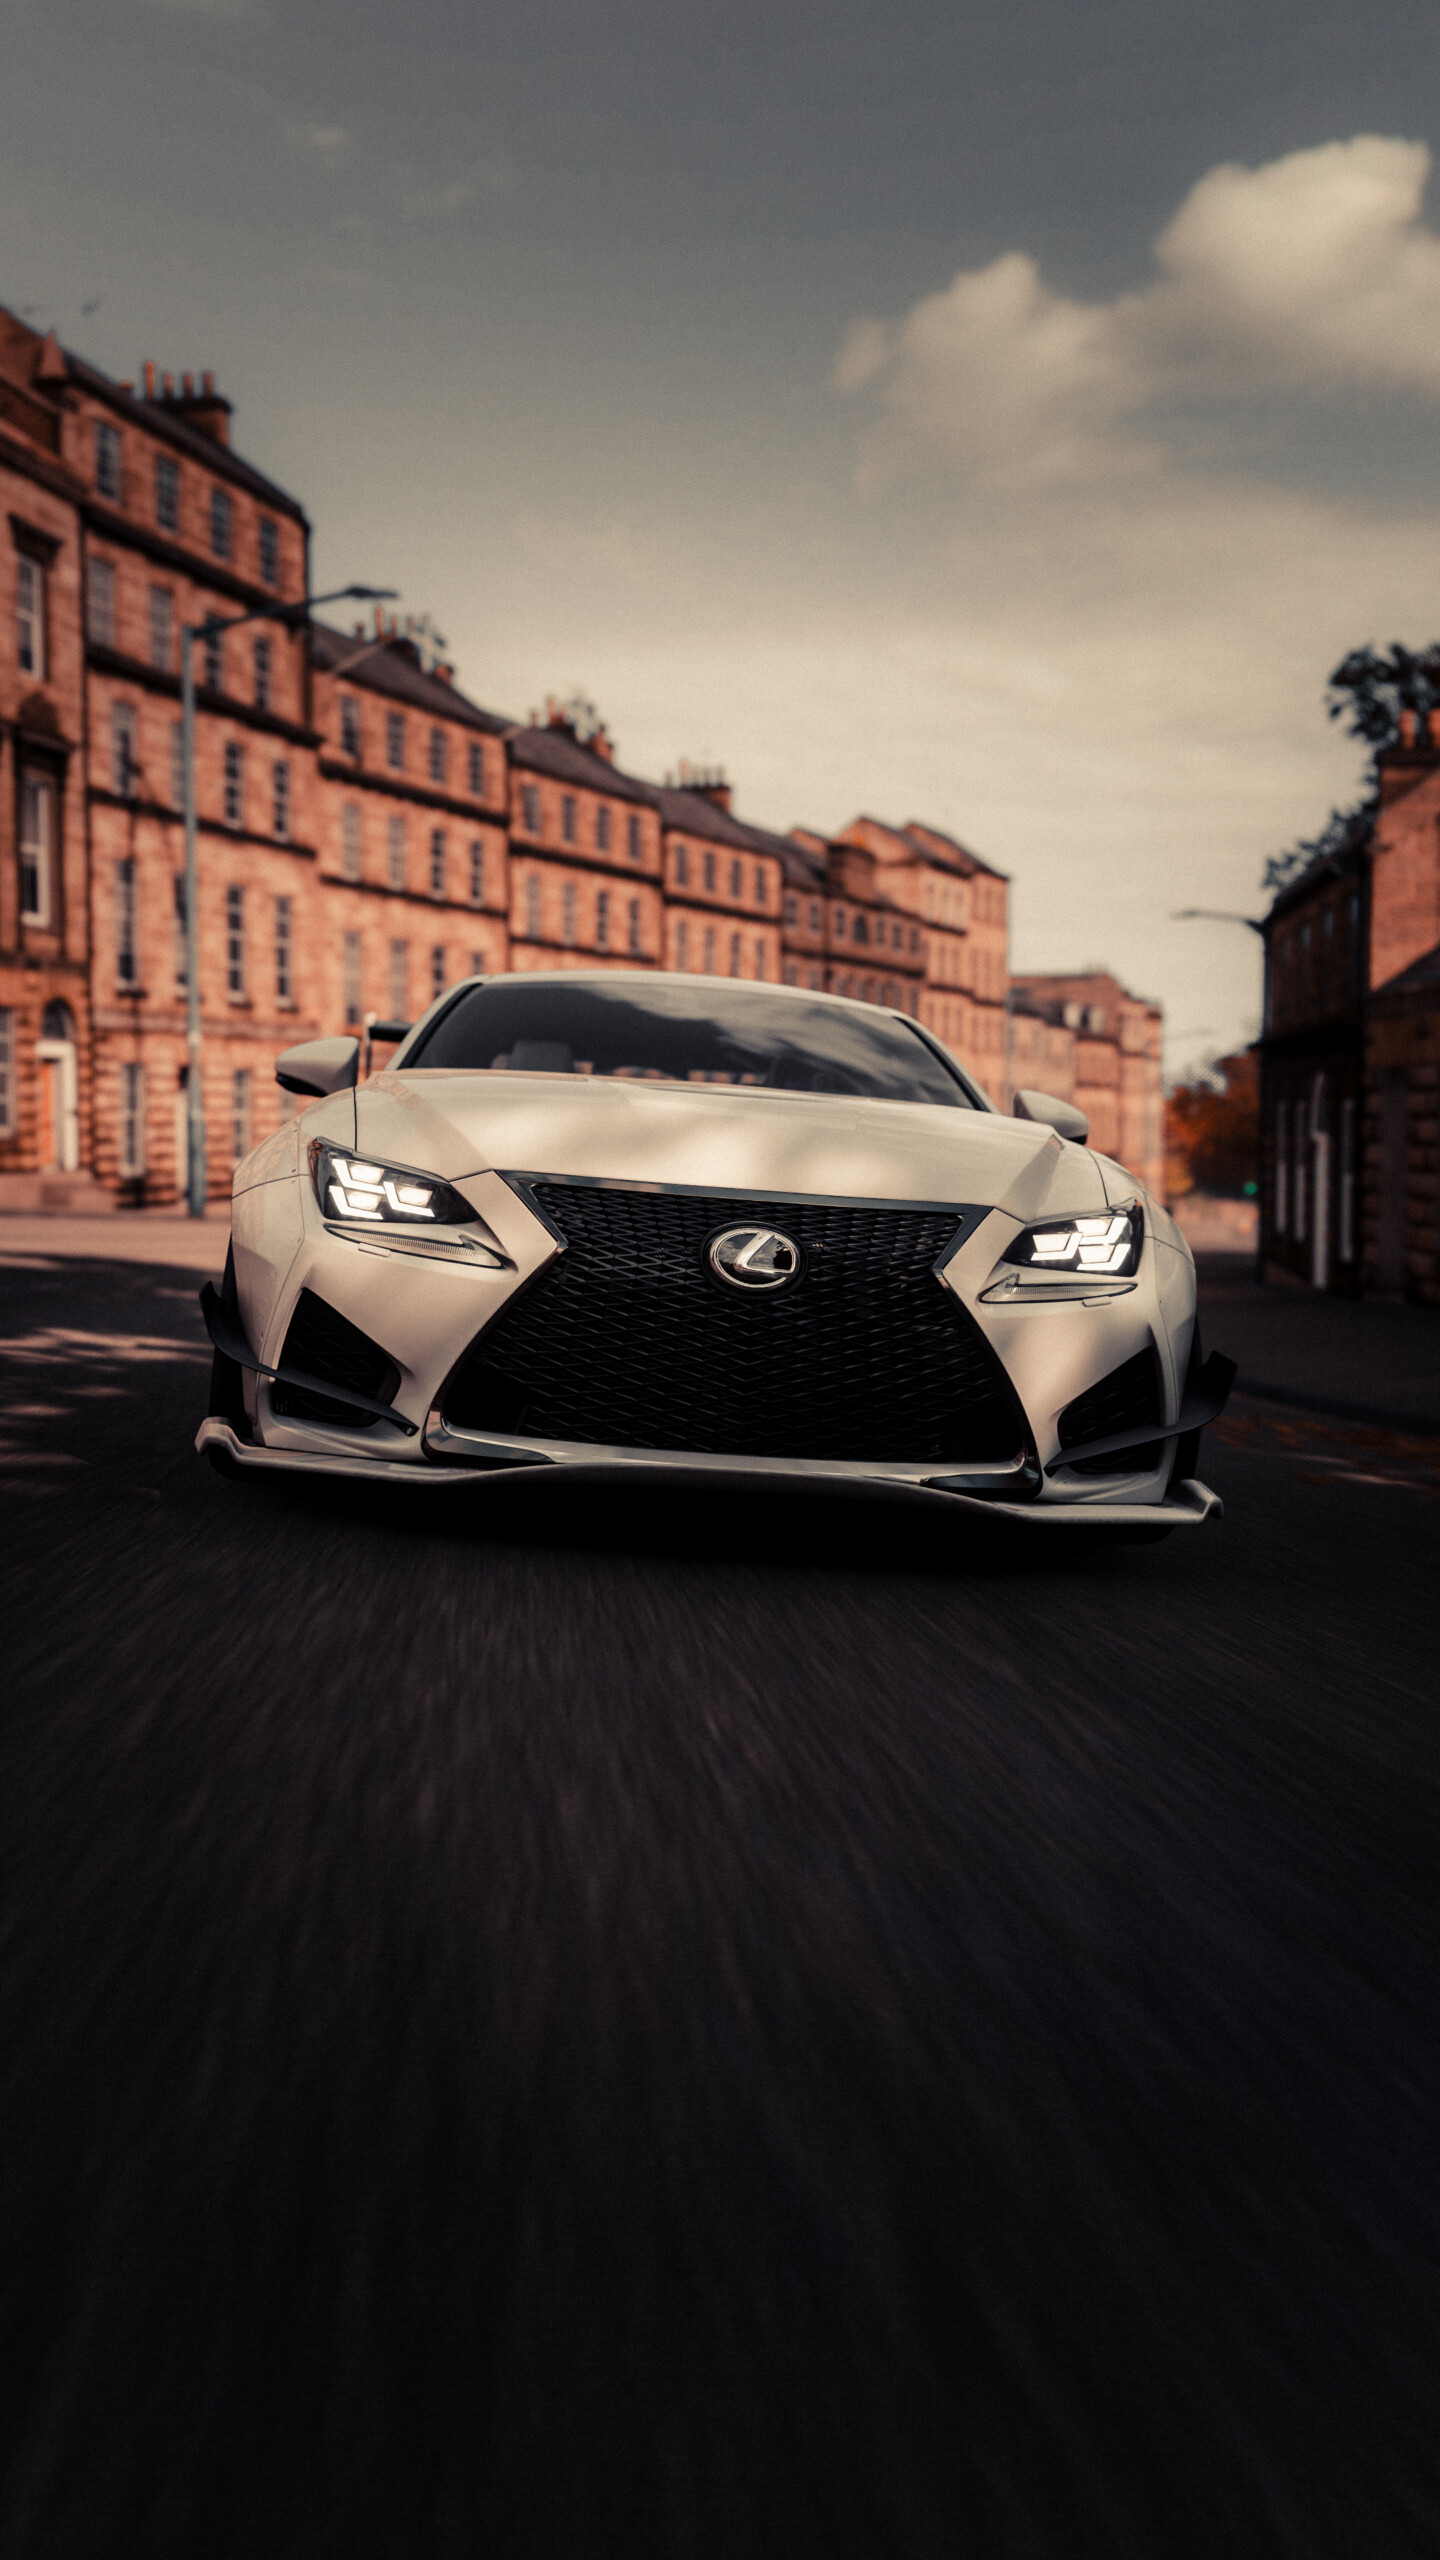 Lexus: Automaker, Known for luxurious sedans and athletic sports cars, RCF. 1440x2560 HD Background.